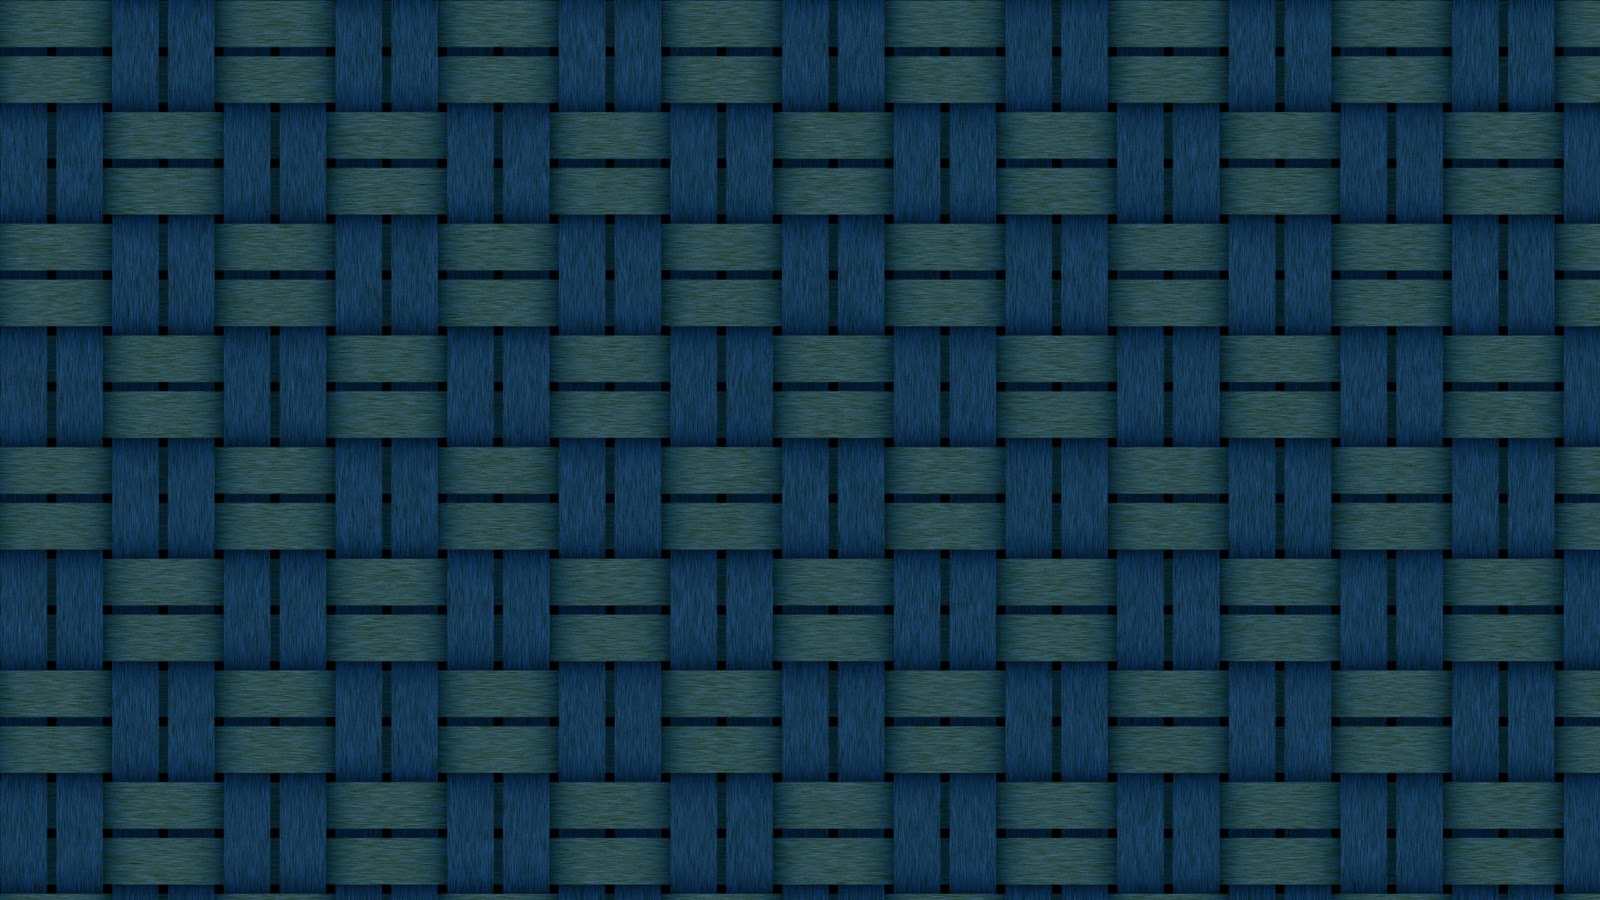 Black And White Wallpaper Blue Squares Weaved